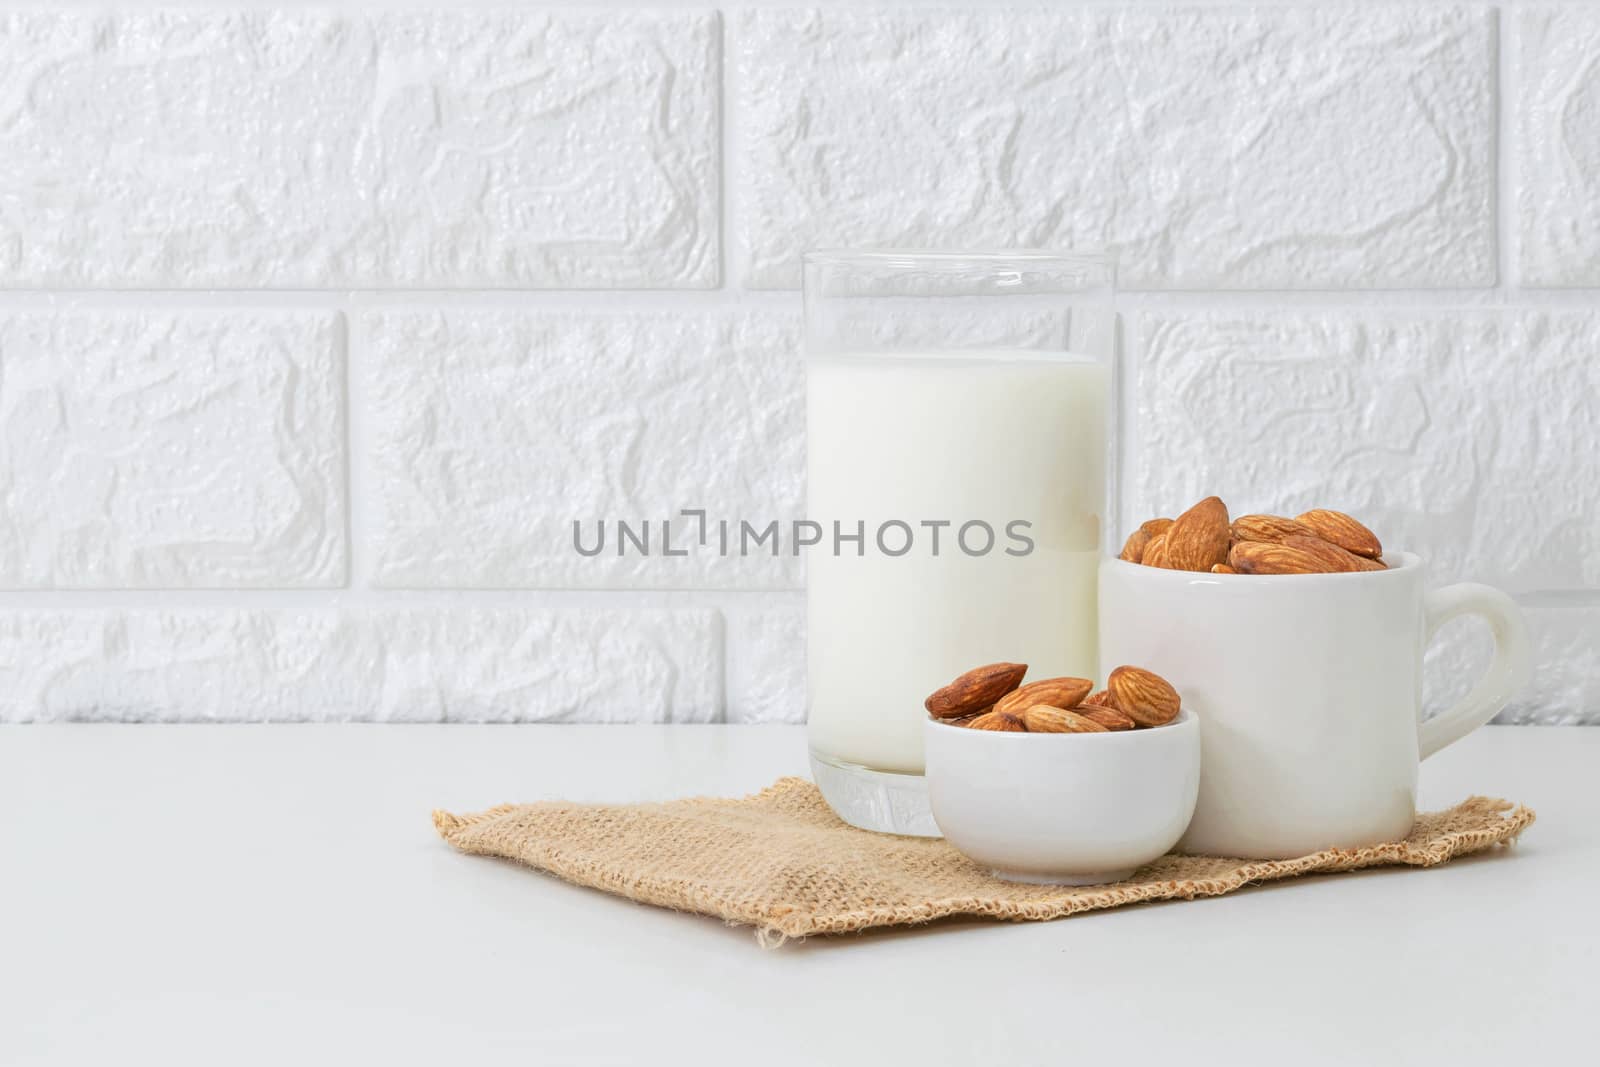 Milk Almonds in a glass on a white background by sompongtom